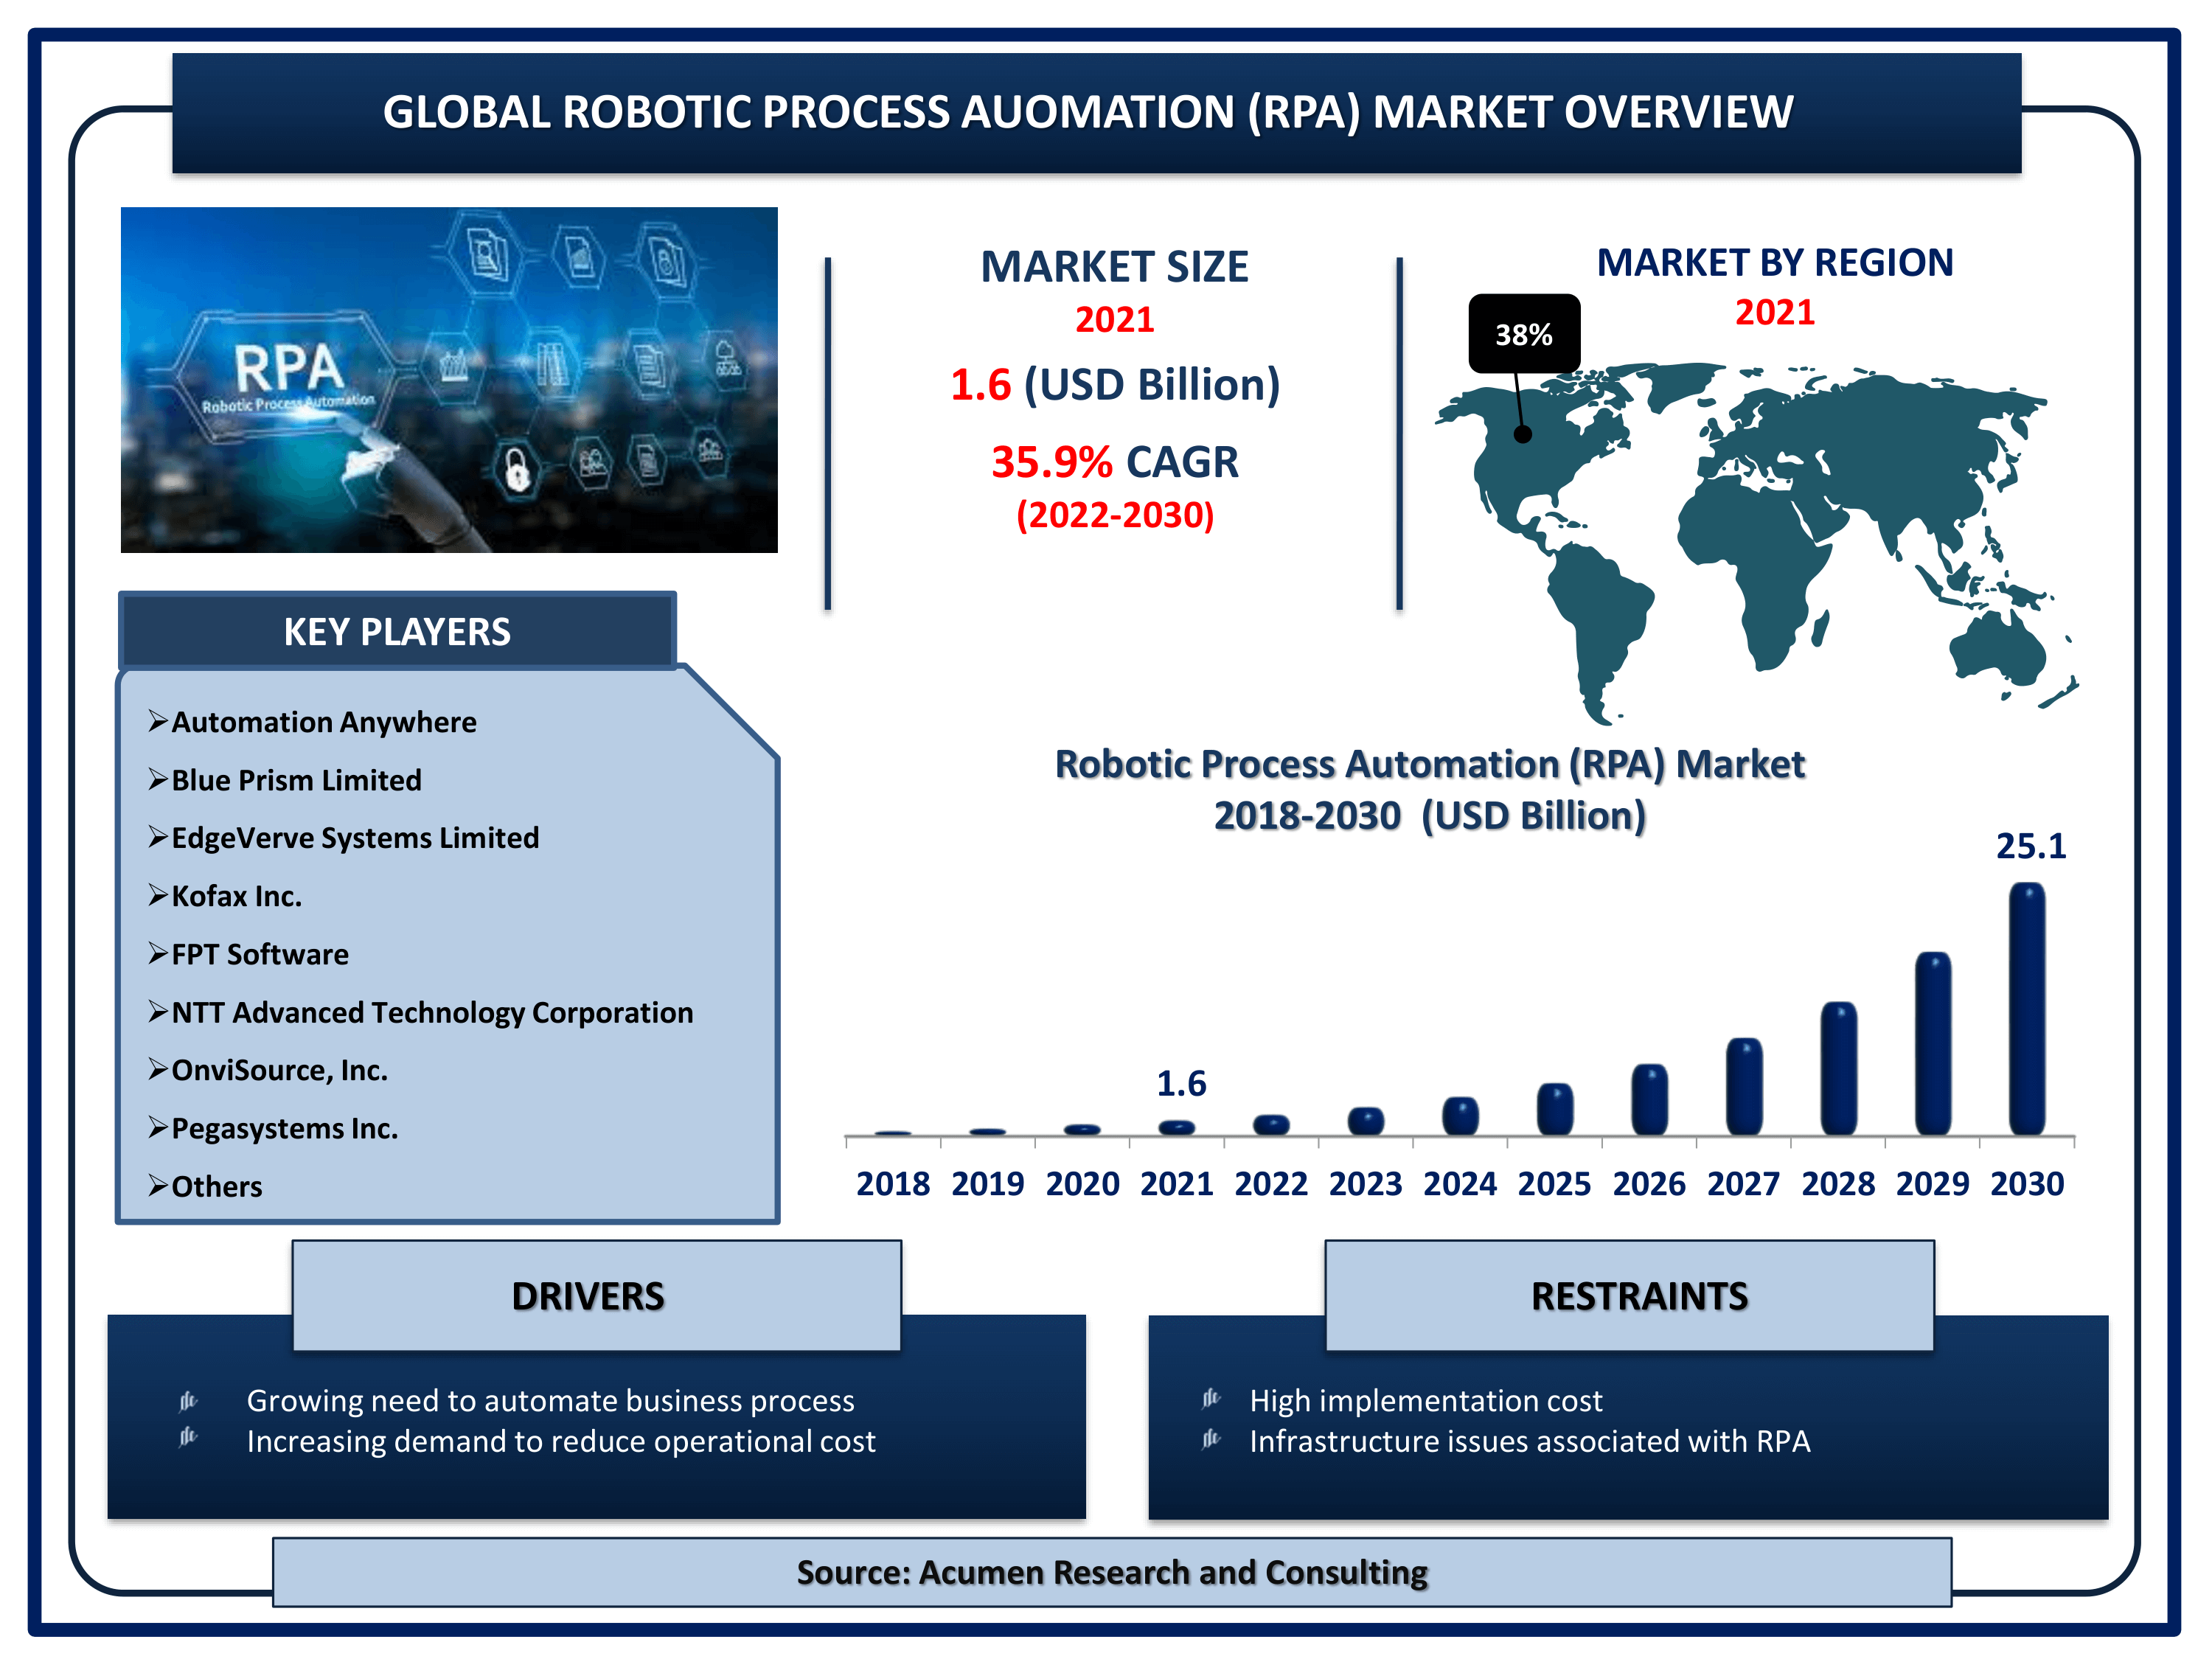 Global robotic process automation market revenue is estimated to reach USD 25.1 Billion by 2030 with a CAGR of 35.9% from 2022 to 2030